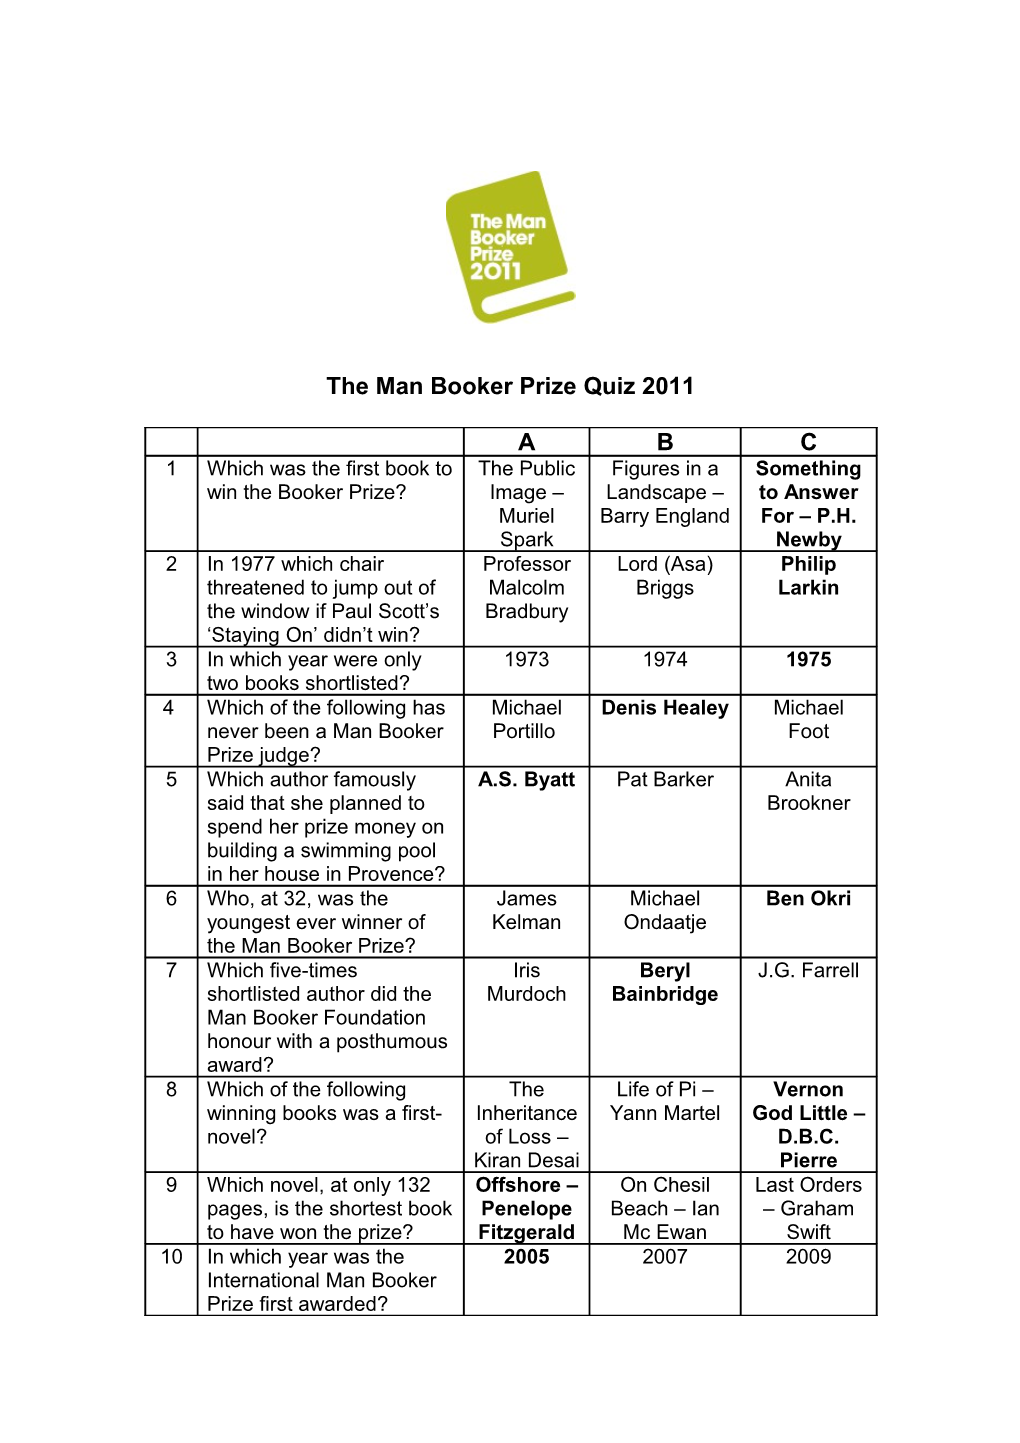 The Man Booker Prize Quiz 2011